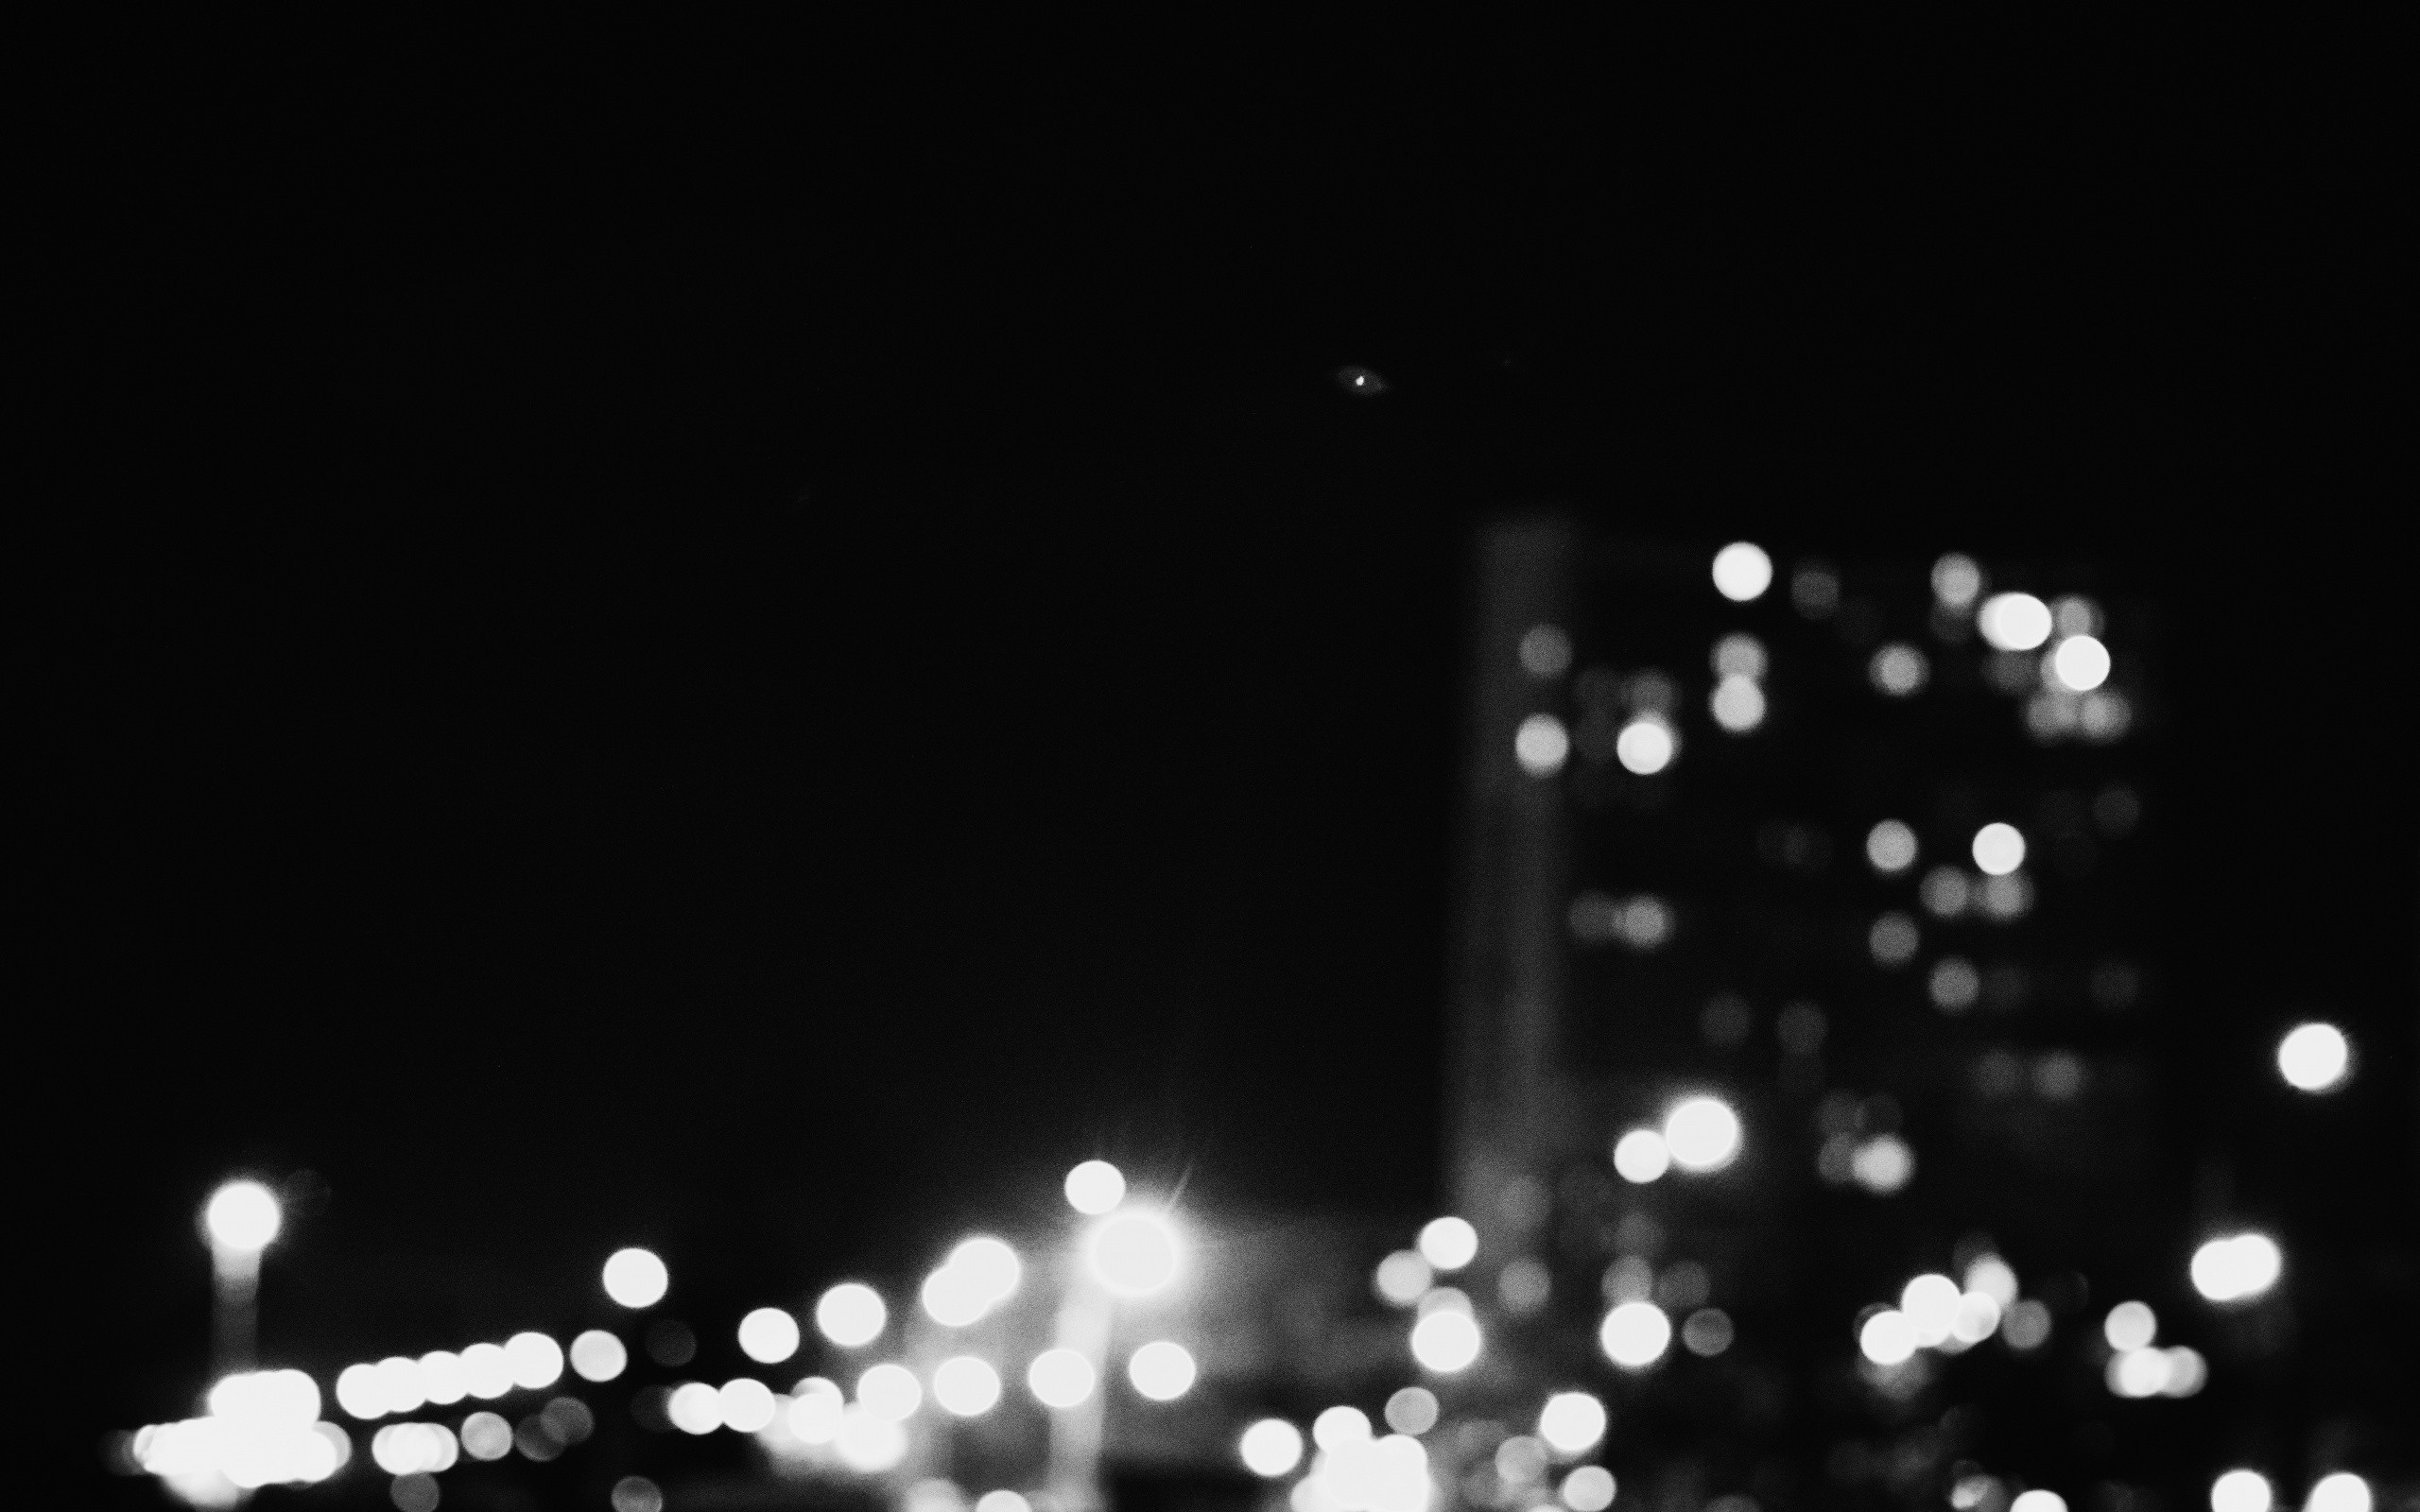 Wallpaper, 2560x1600 px, blurred, cityscapes, night, town 2560x1600